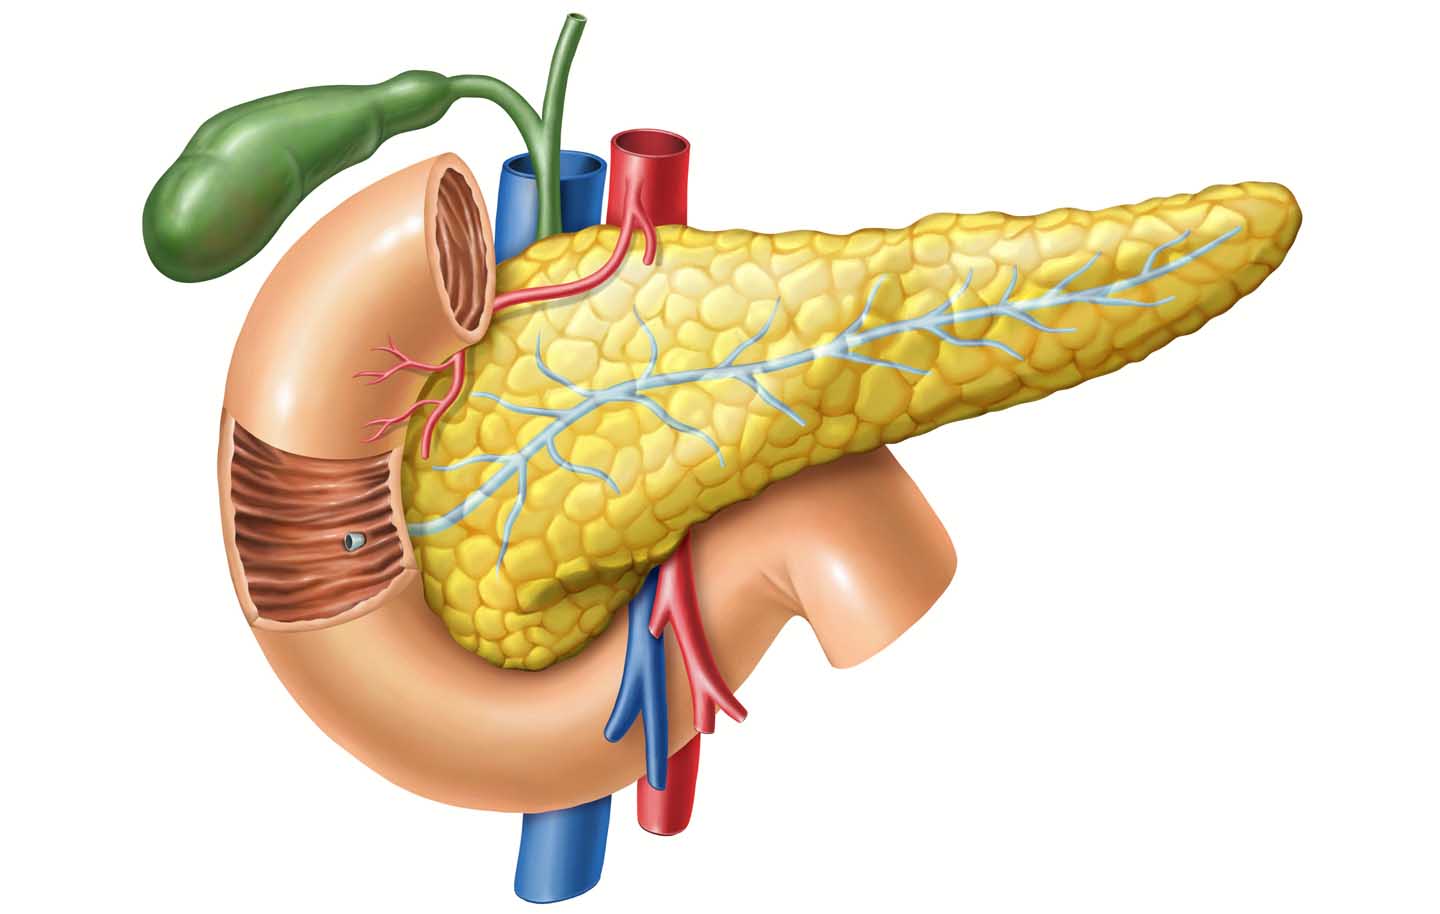 Anatomic drawing of the pancreas together with the bile duct